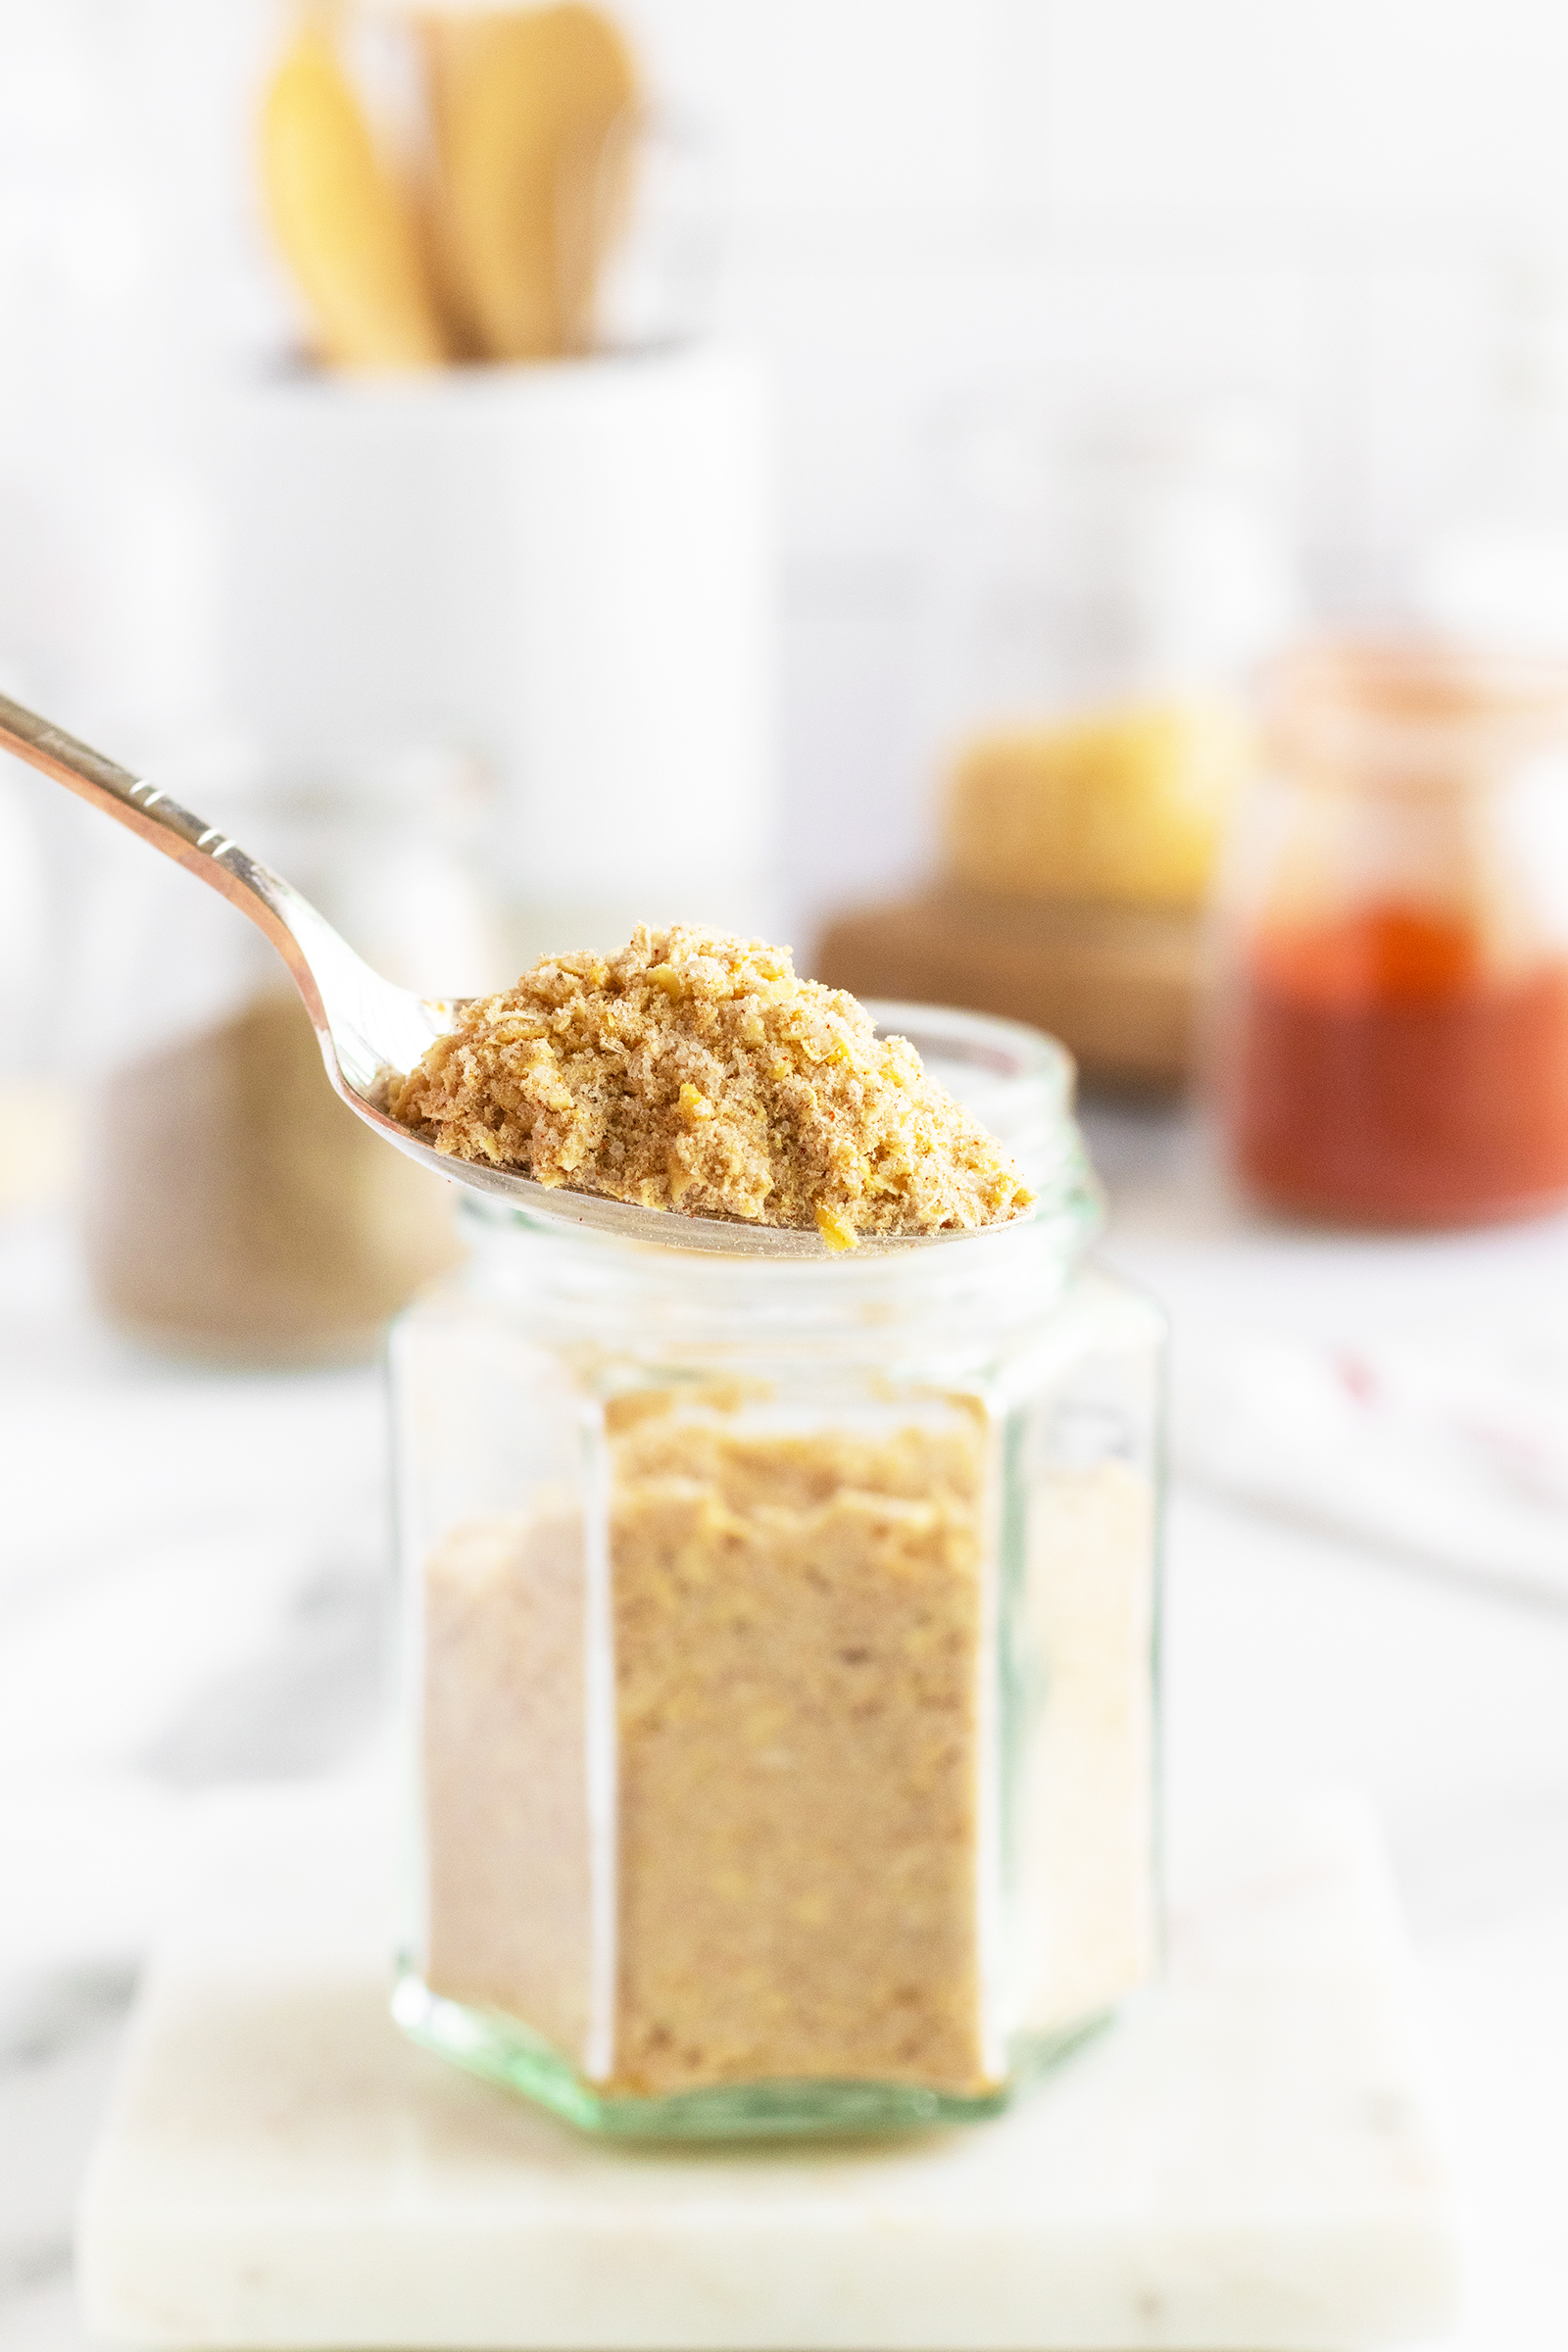 Onion soup mix in a spoon by a jar